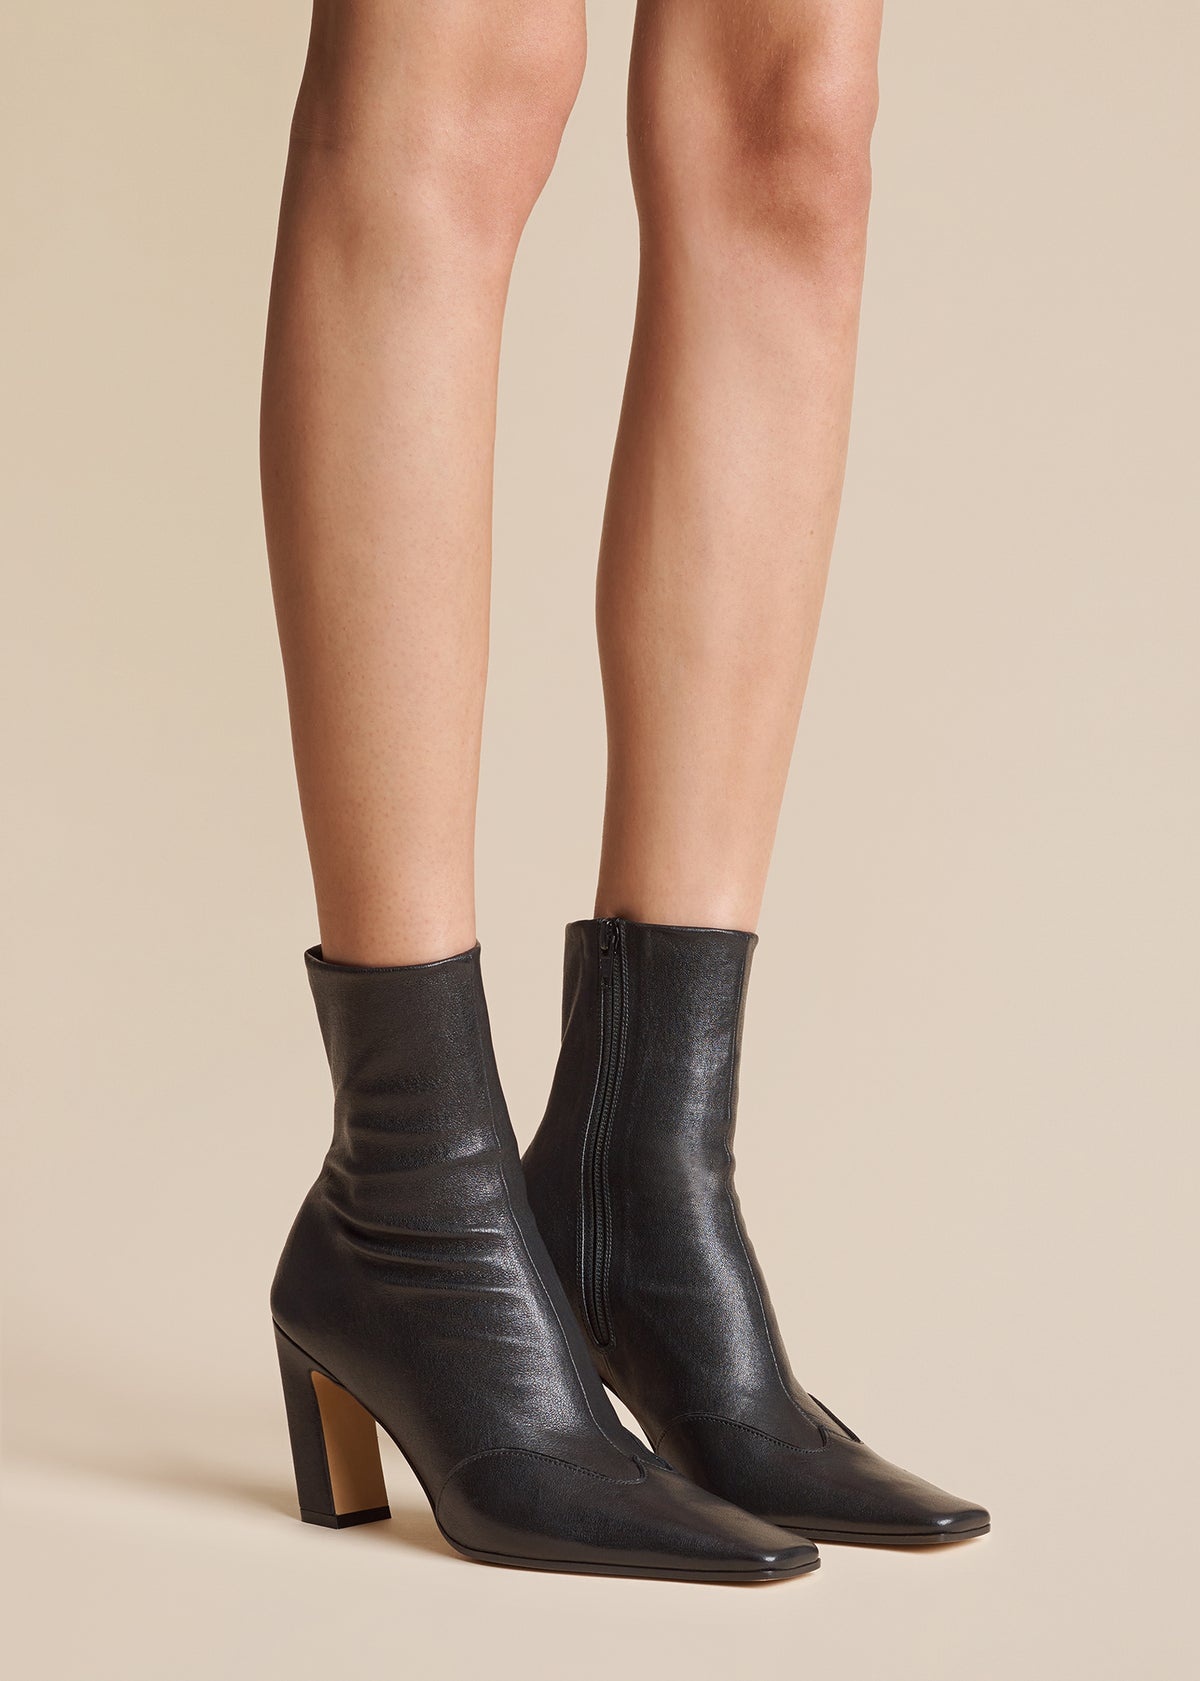 The Nevada Stretch High Boot in Black Nappa Leather - 5